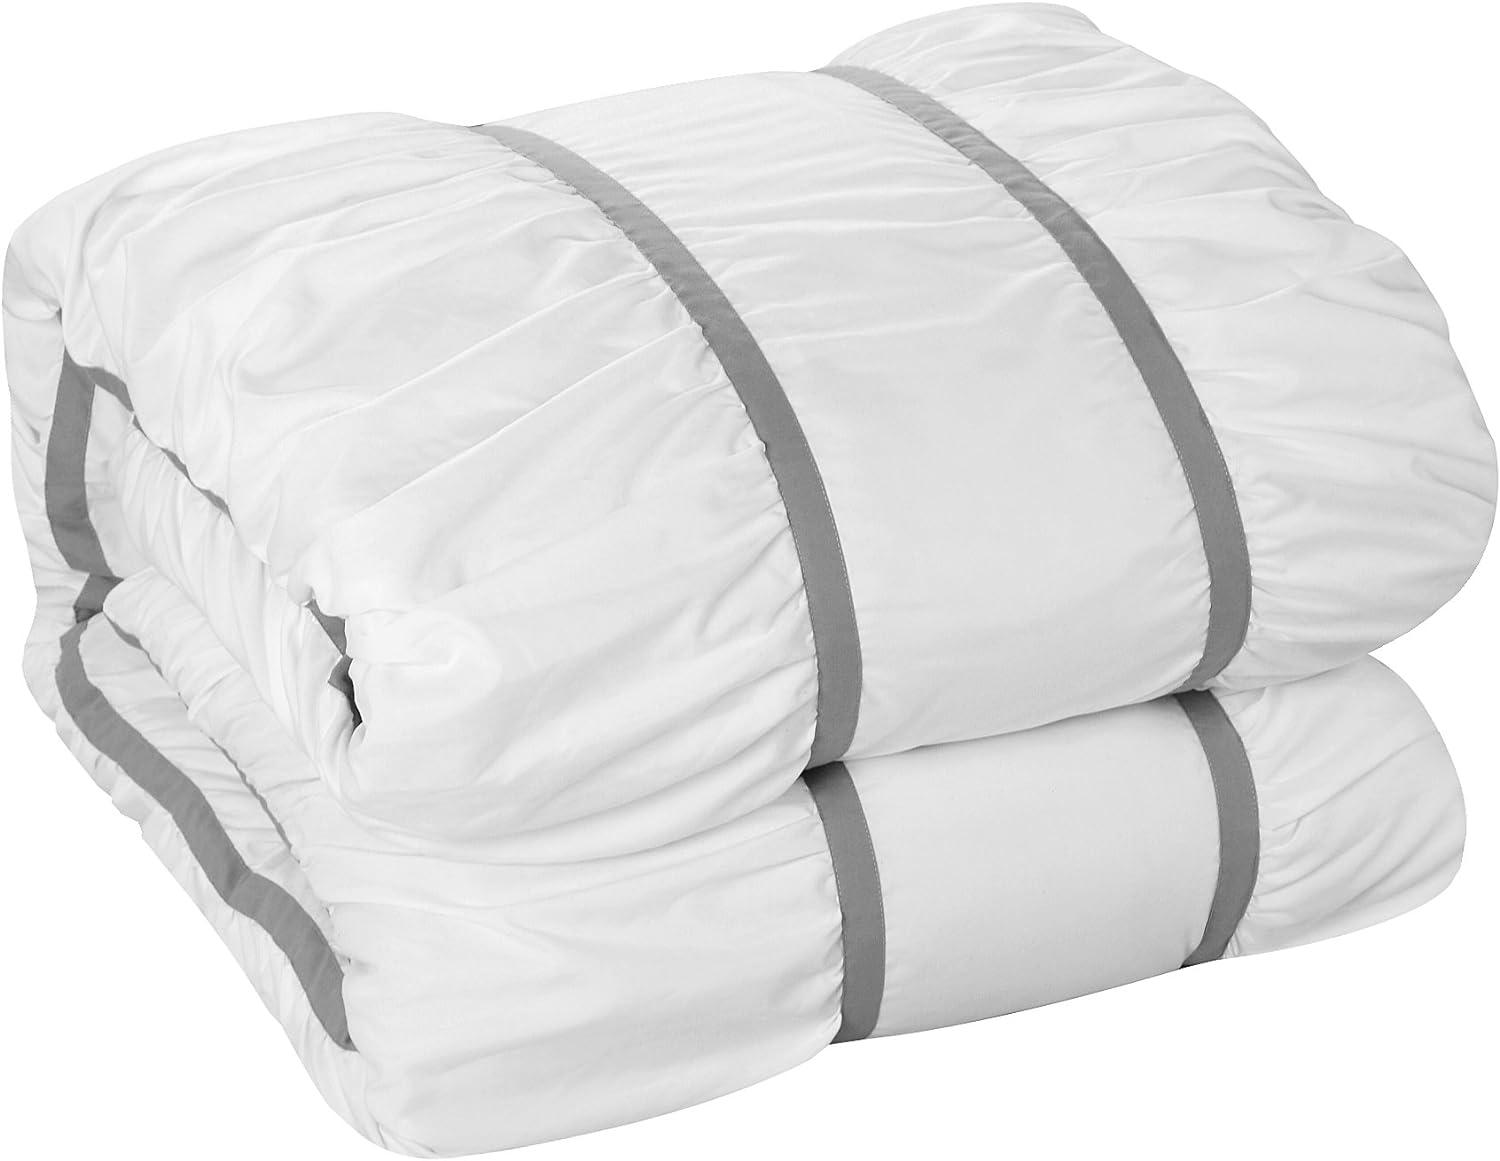 Luxurious White Queen Down Alternative Microfiber Bed in a Bag Set